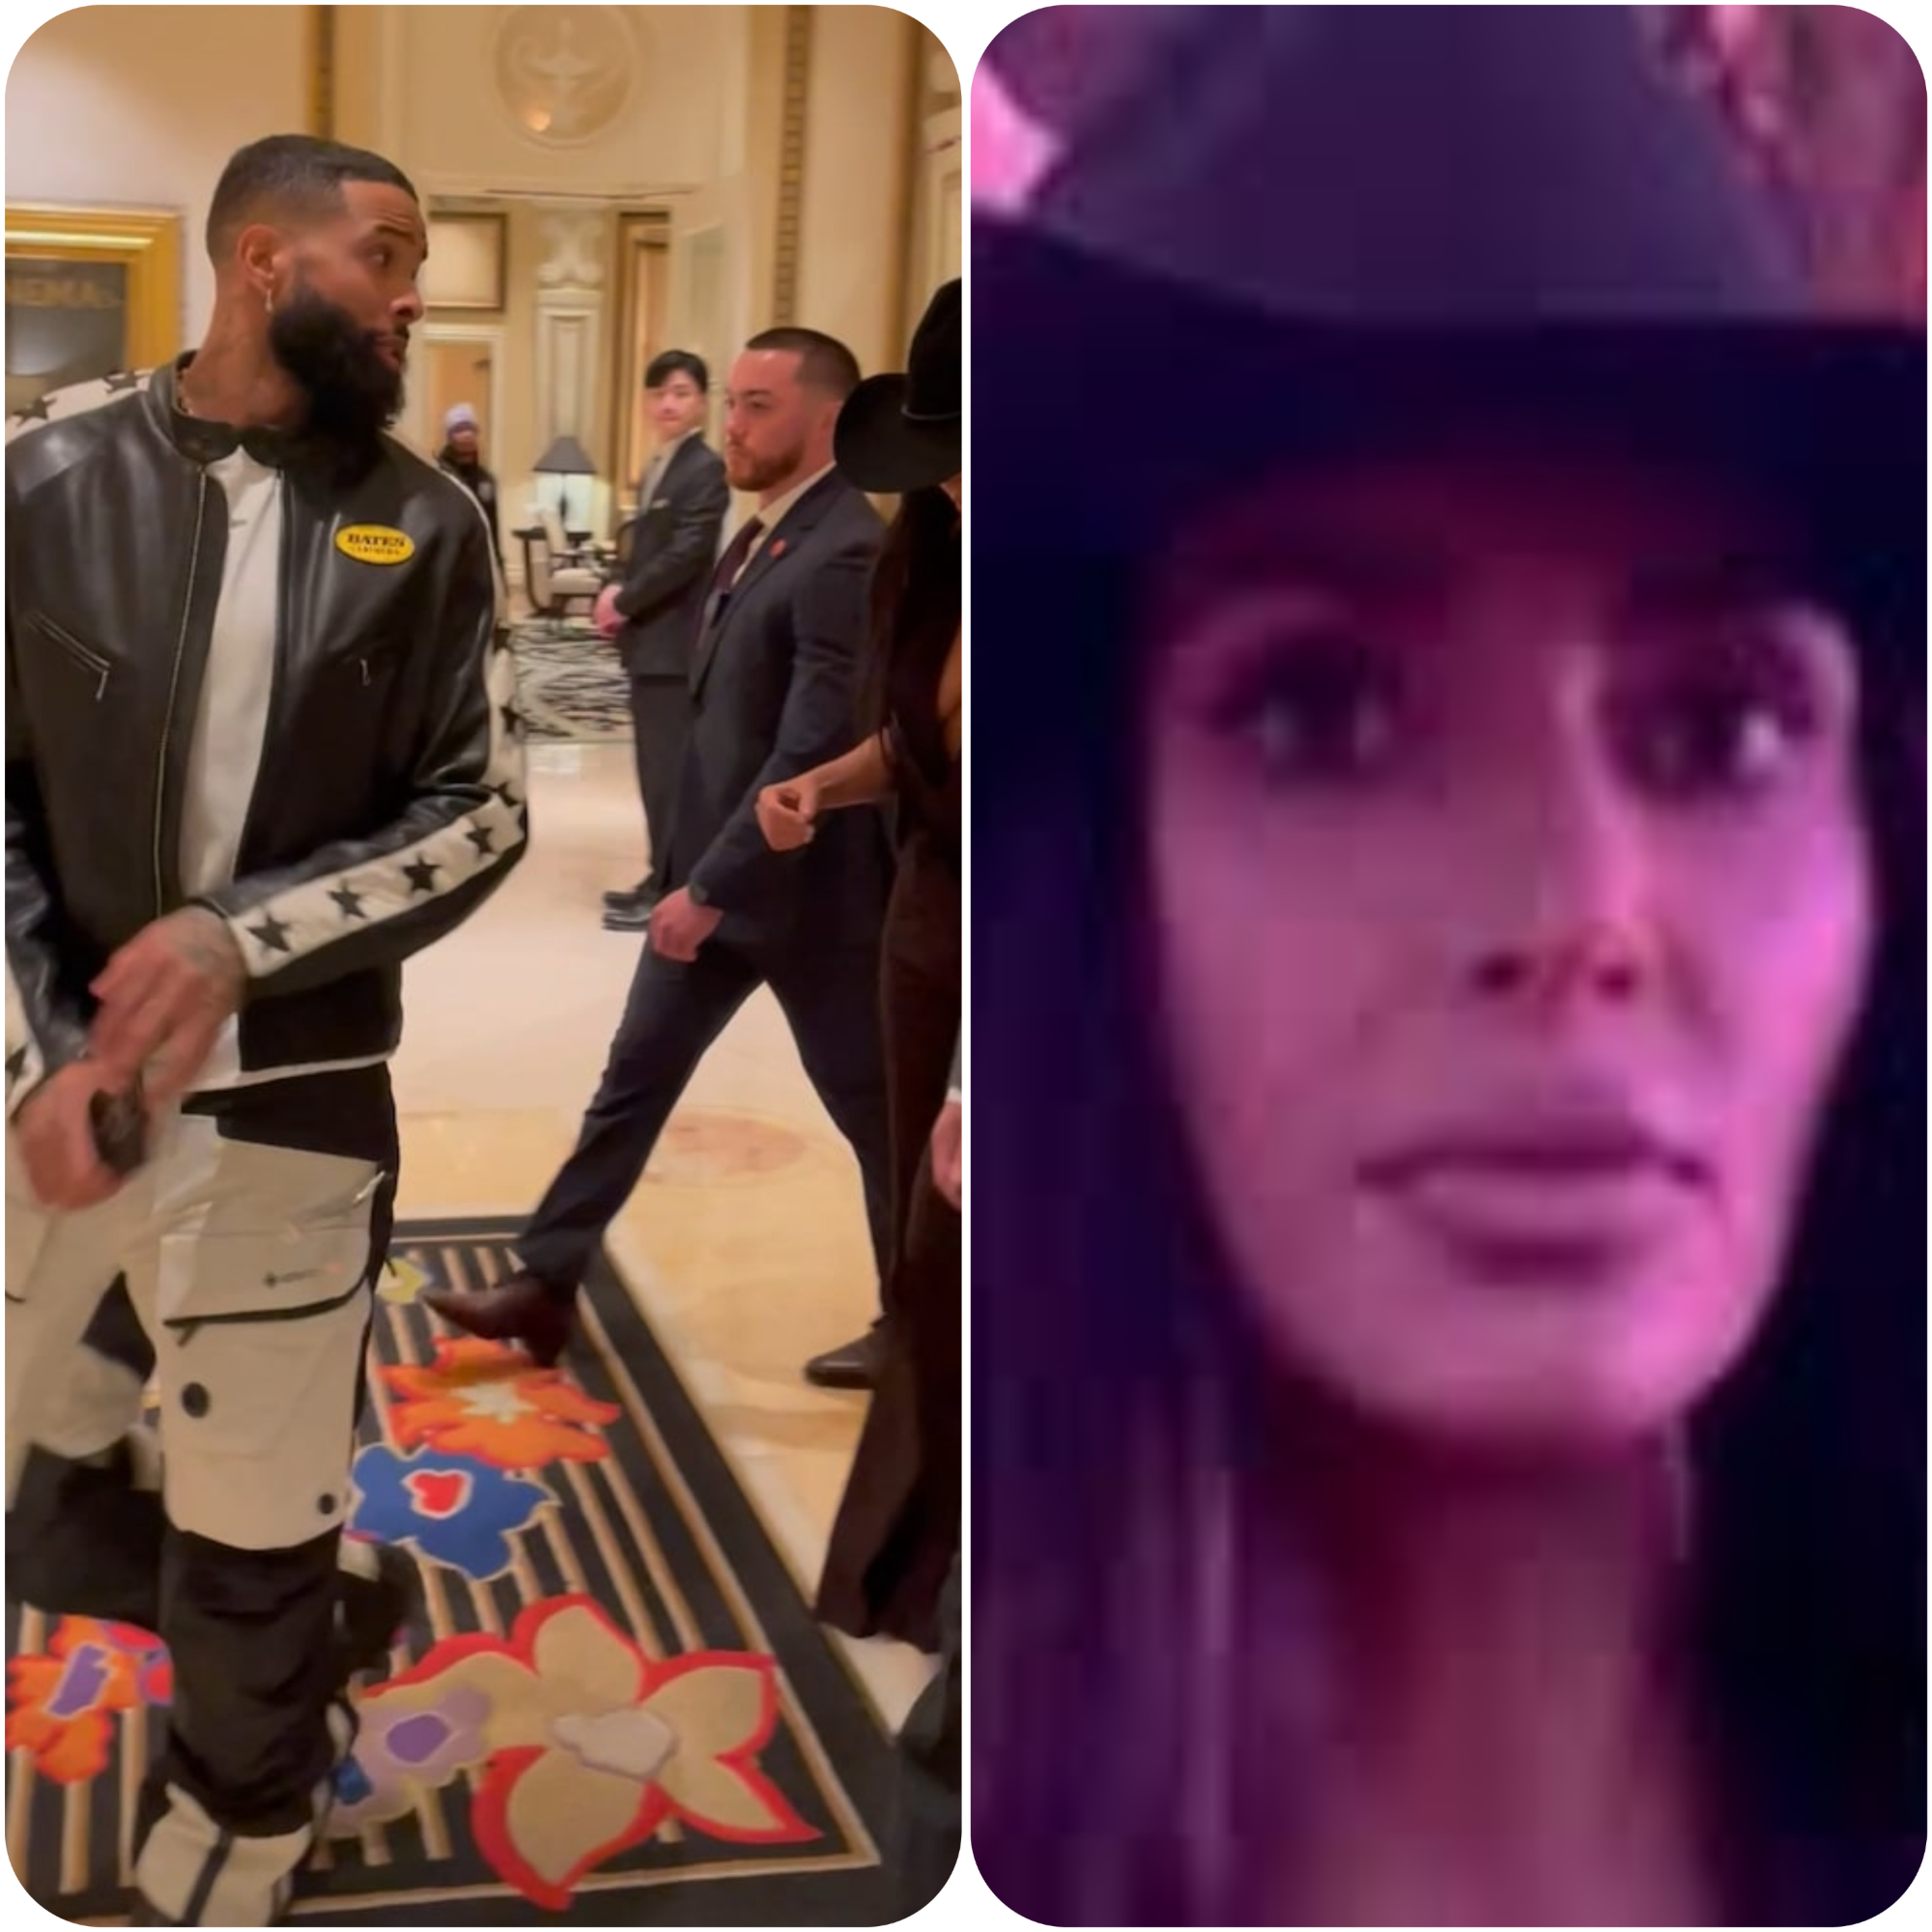 Kim Kardashian and Baltimore Ravens wide receiver Odell Beckham Jr. were seen hanging out at a Super Bowl party in Las Vegas this weekend